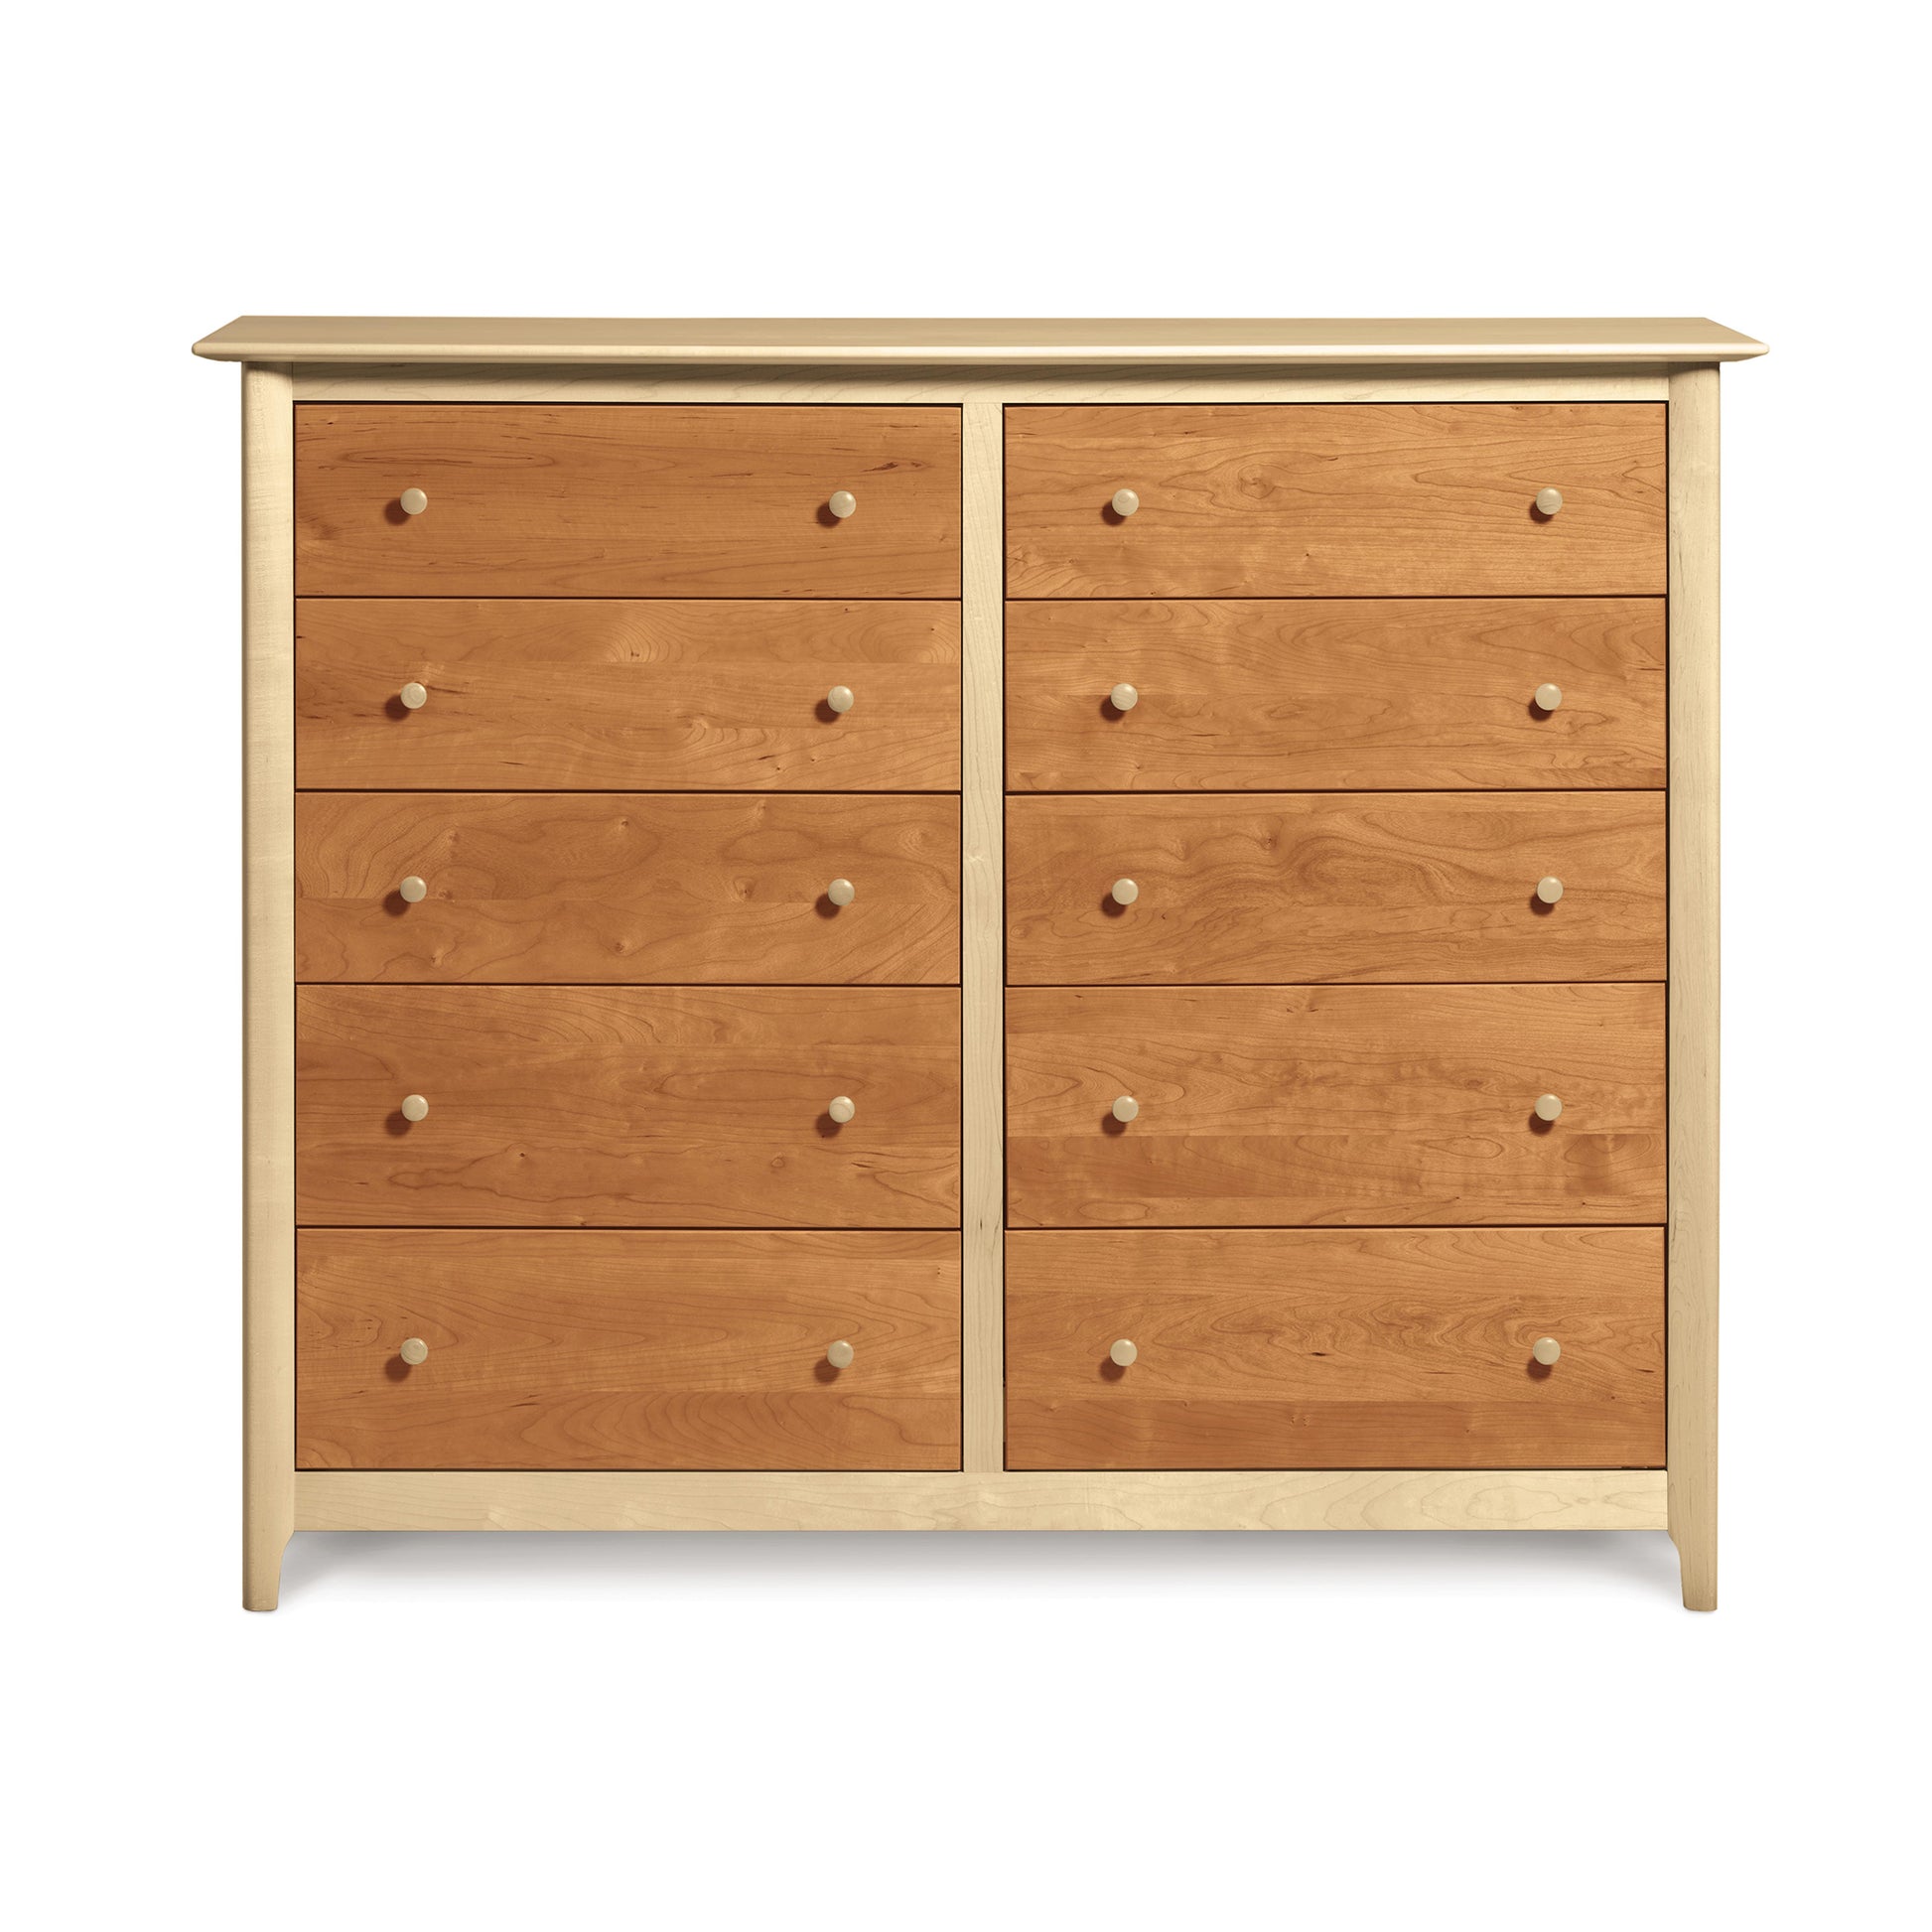 An image of a Sarah 10-Drawer Dresser by Copeland Furniture, featuring a timeless shaker design.